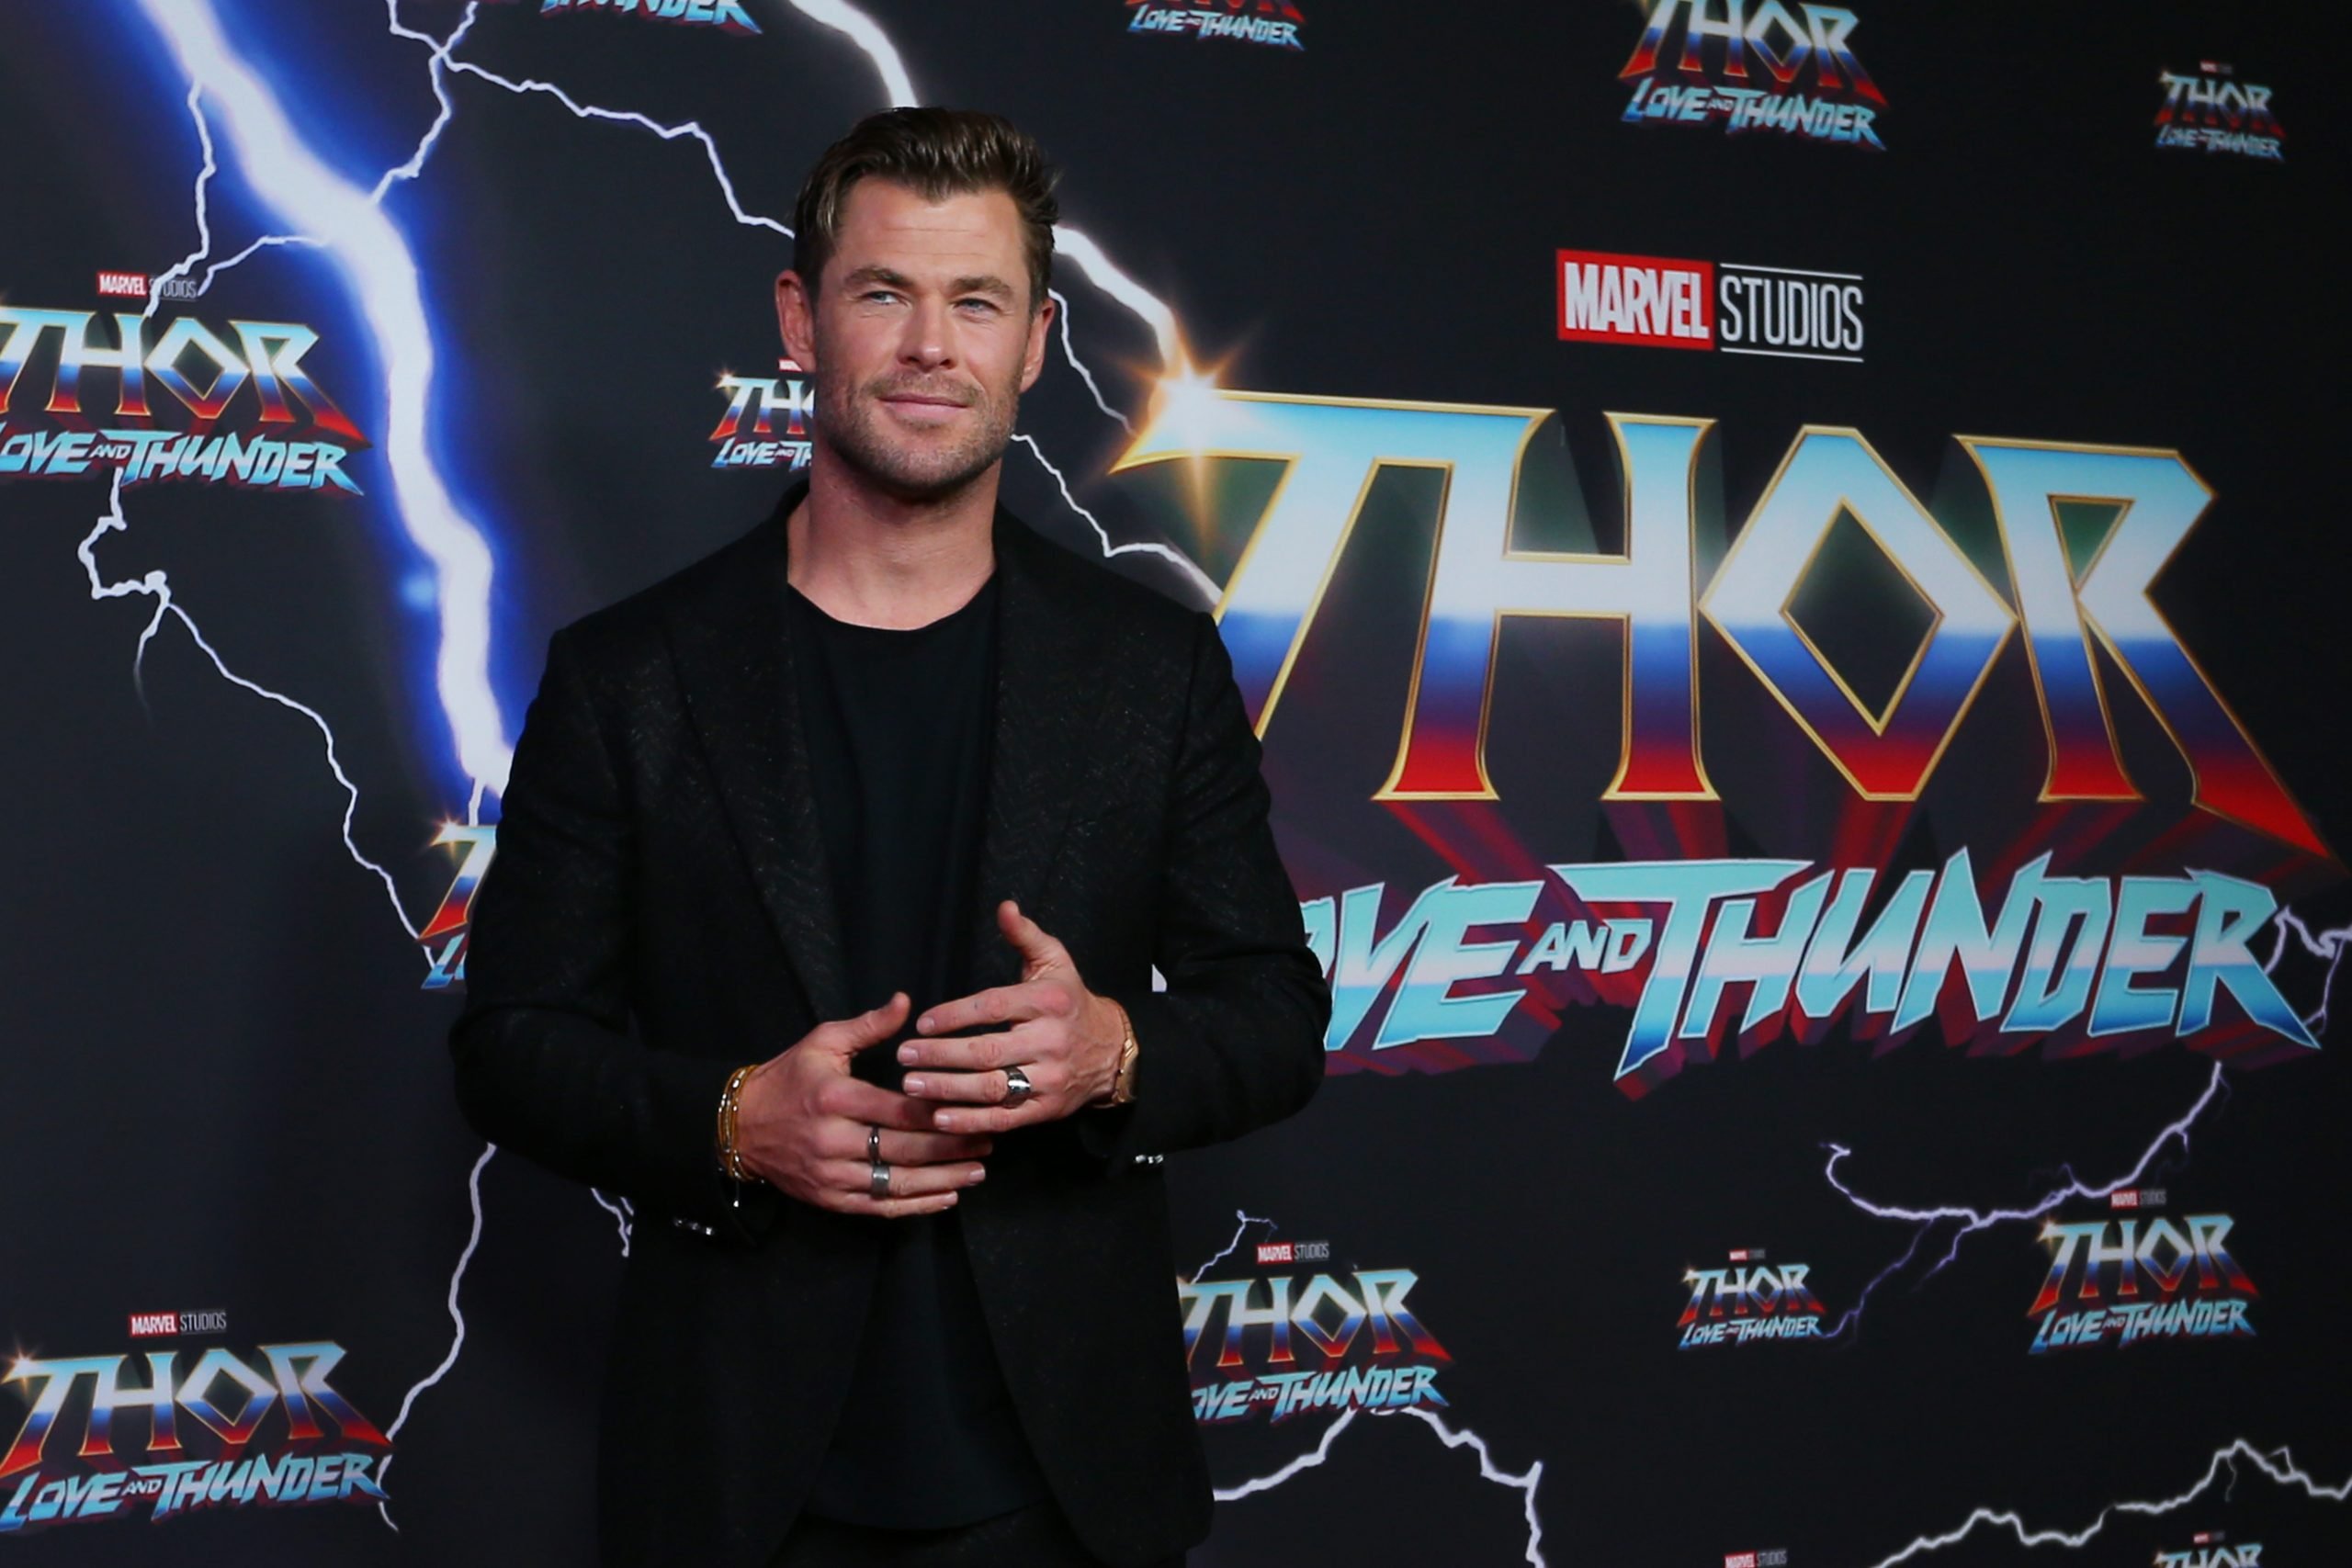 Thor Love and Thunder Review: A Bit Shaky, Mostly Successful